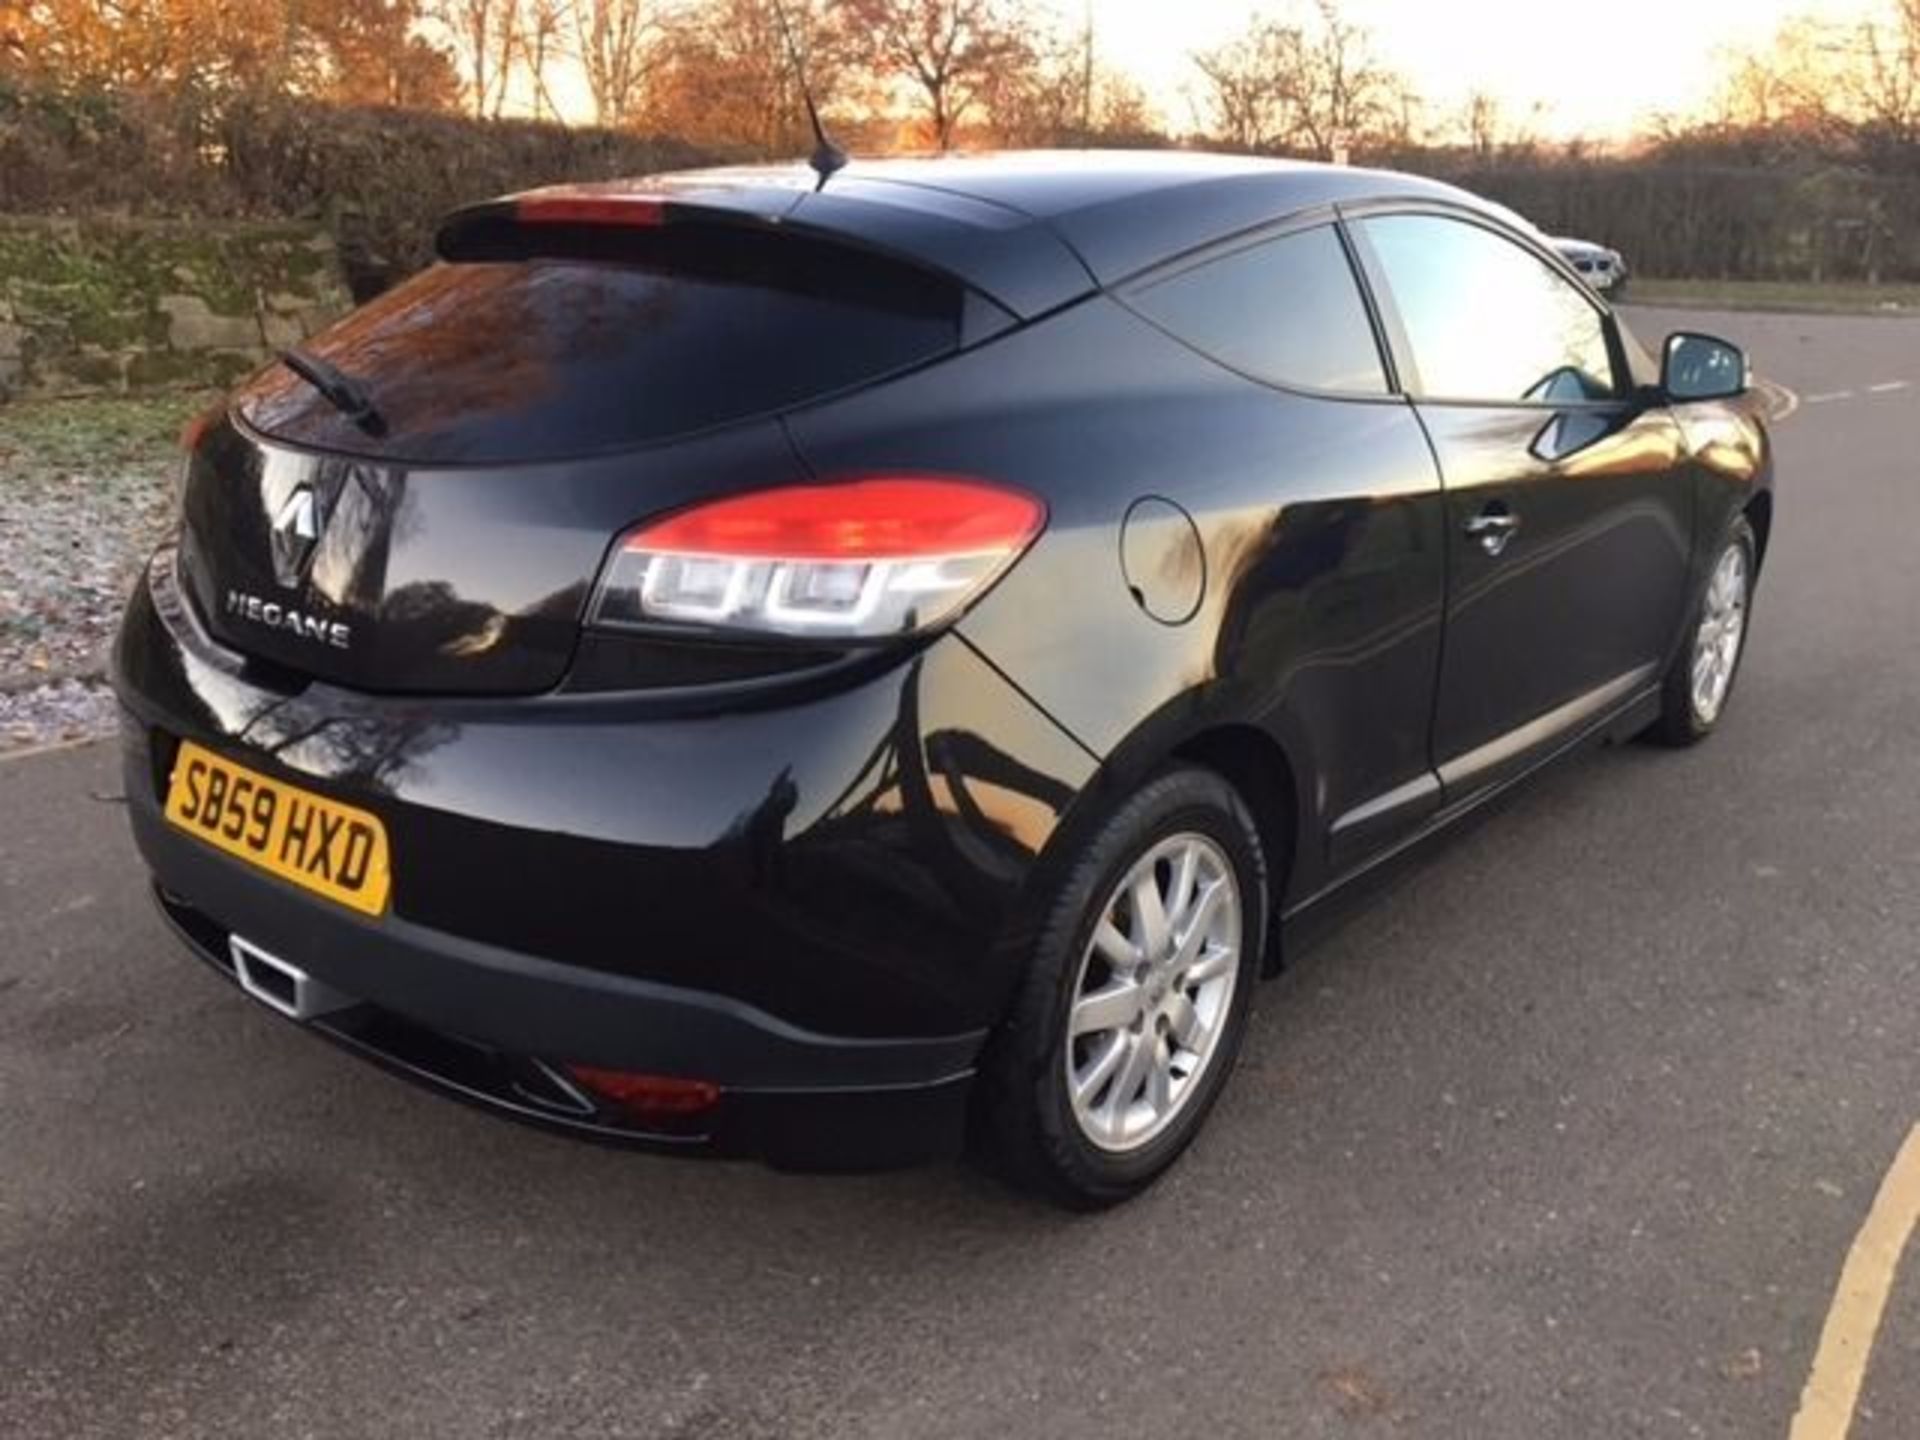 2009 RENAULT MEGANE 1.6 EXPRESSION VVT 110 BHP WITH RS BODY STYLING KIT. 55K MILES 12 MONTHS MOT. - Image 4 of 9